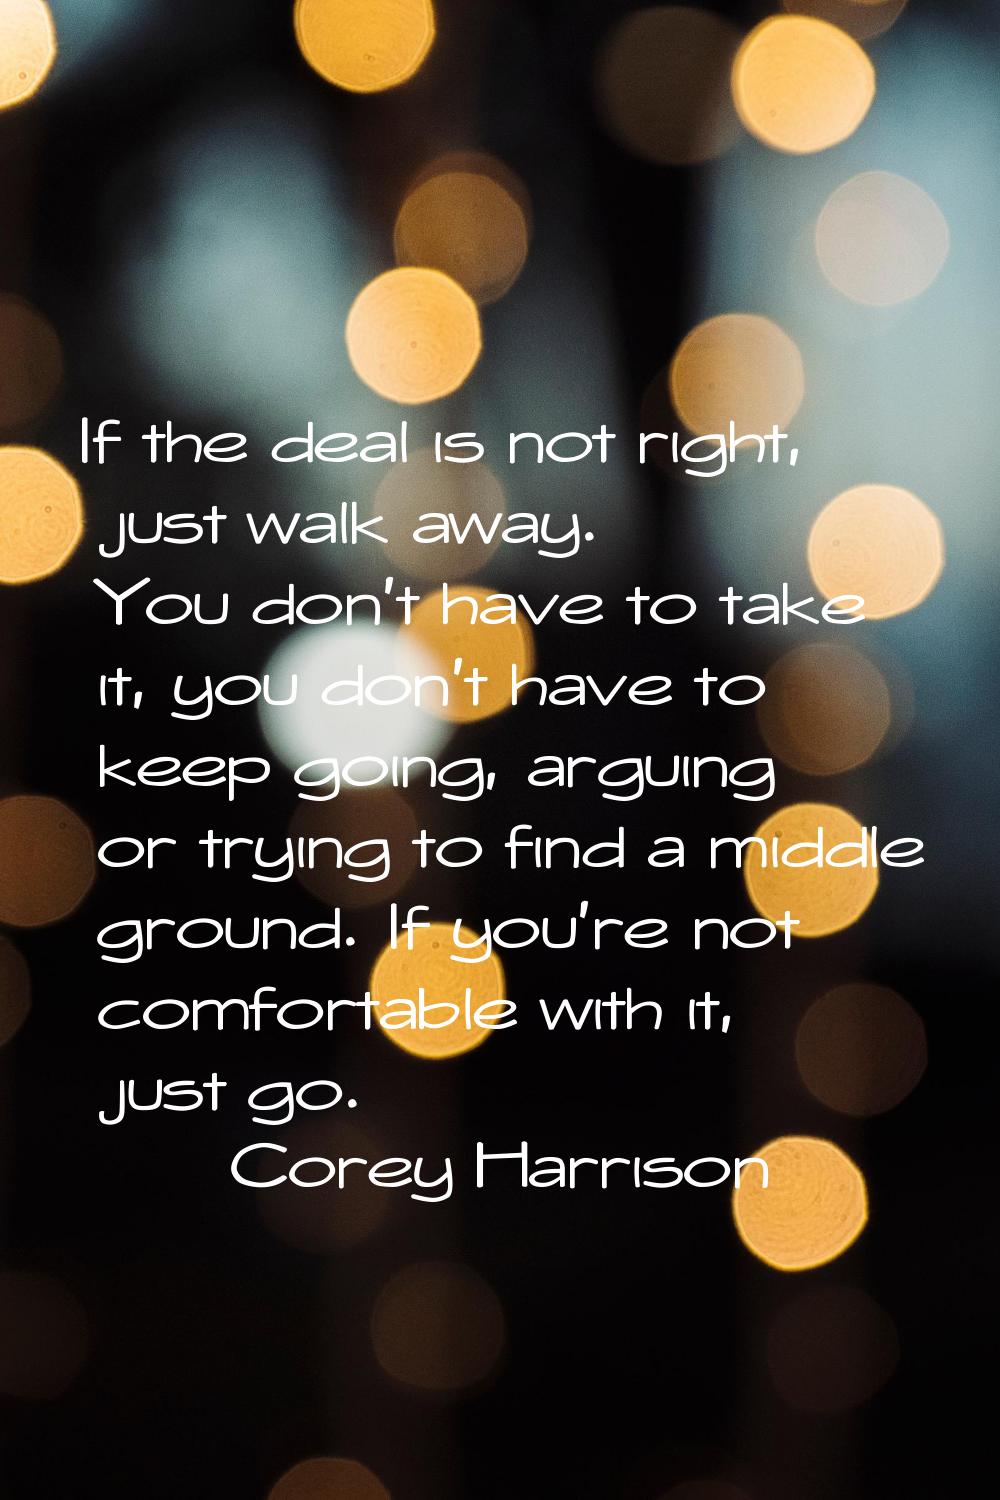 If the deal is not right, just walk away. You don't have to take it, you don't have to keep going, 